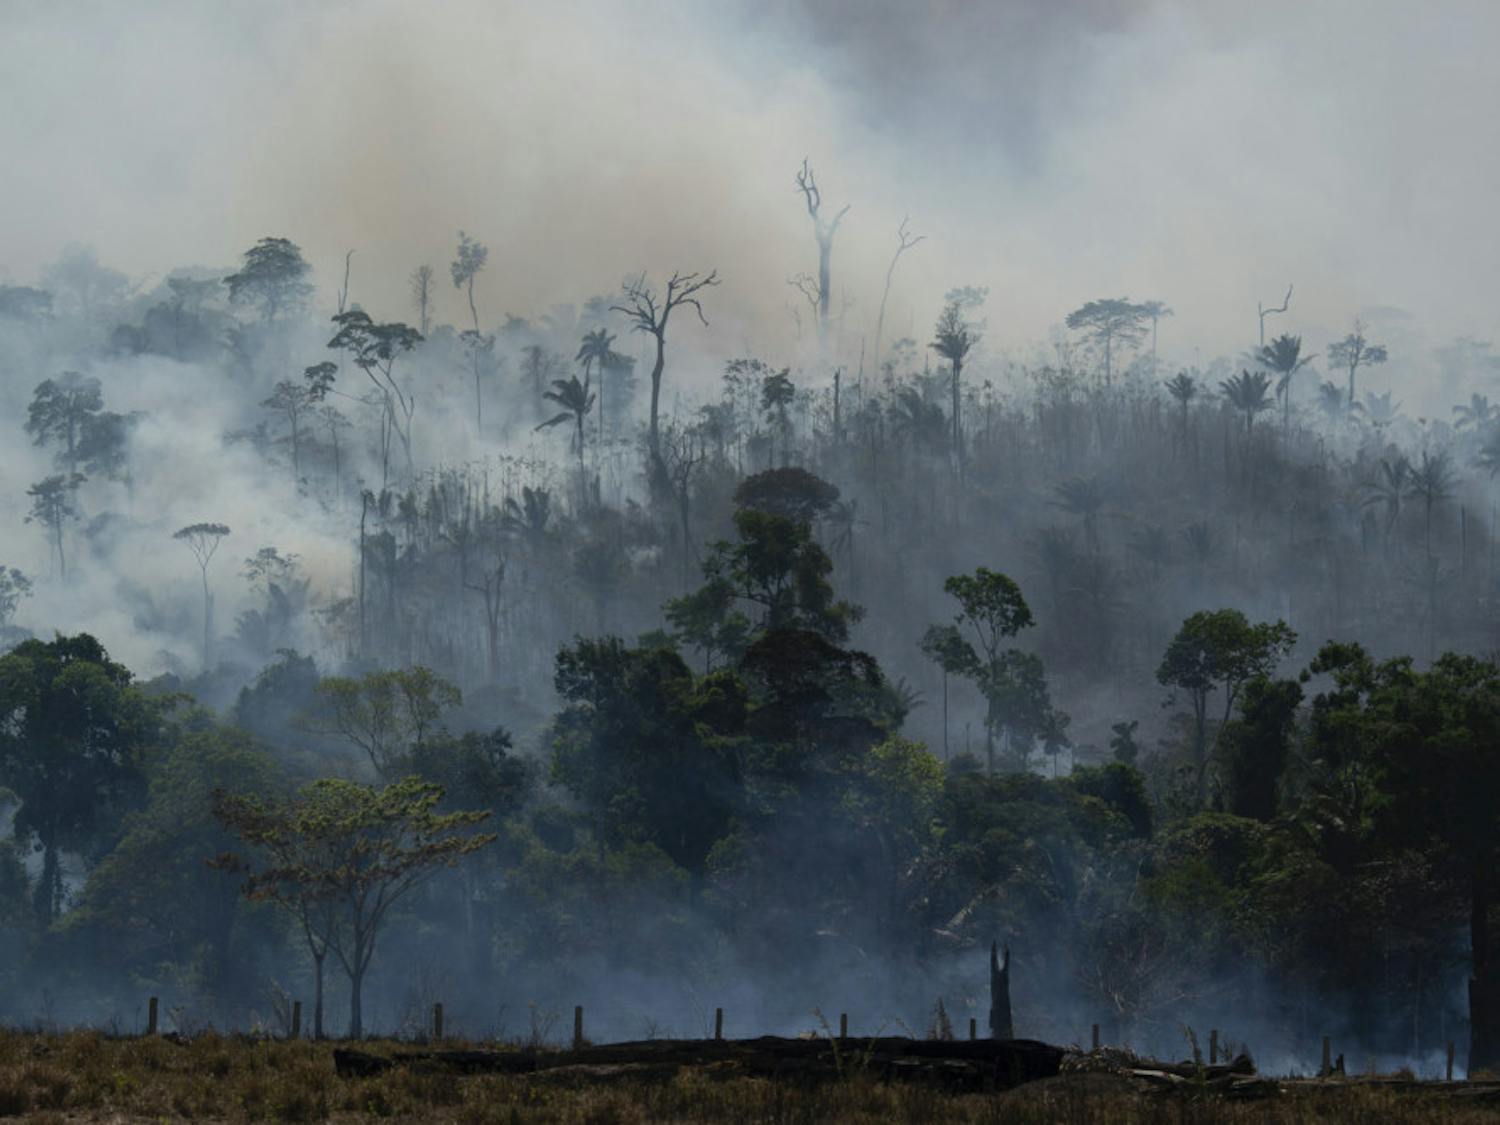 Fire consumes the Amazon rainforest in Altamira, Brazil, on Tuesday, Aug. 27, 2019. Fires across the Brazilian Amazon have sparked an international outcry for preservation of the world's largest rainforest. (AP Photo/Leo Correa)